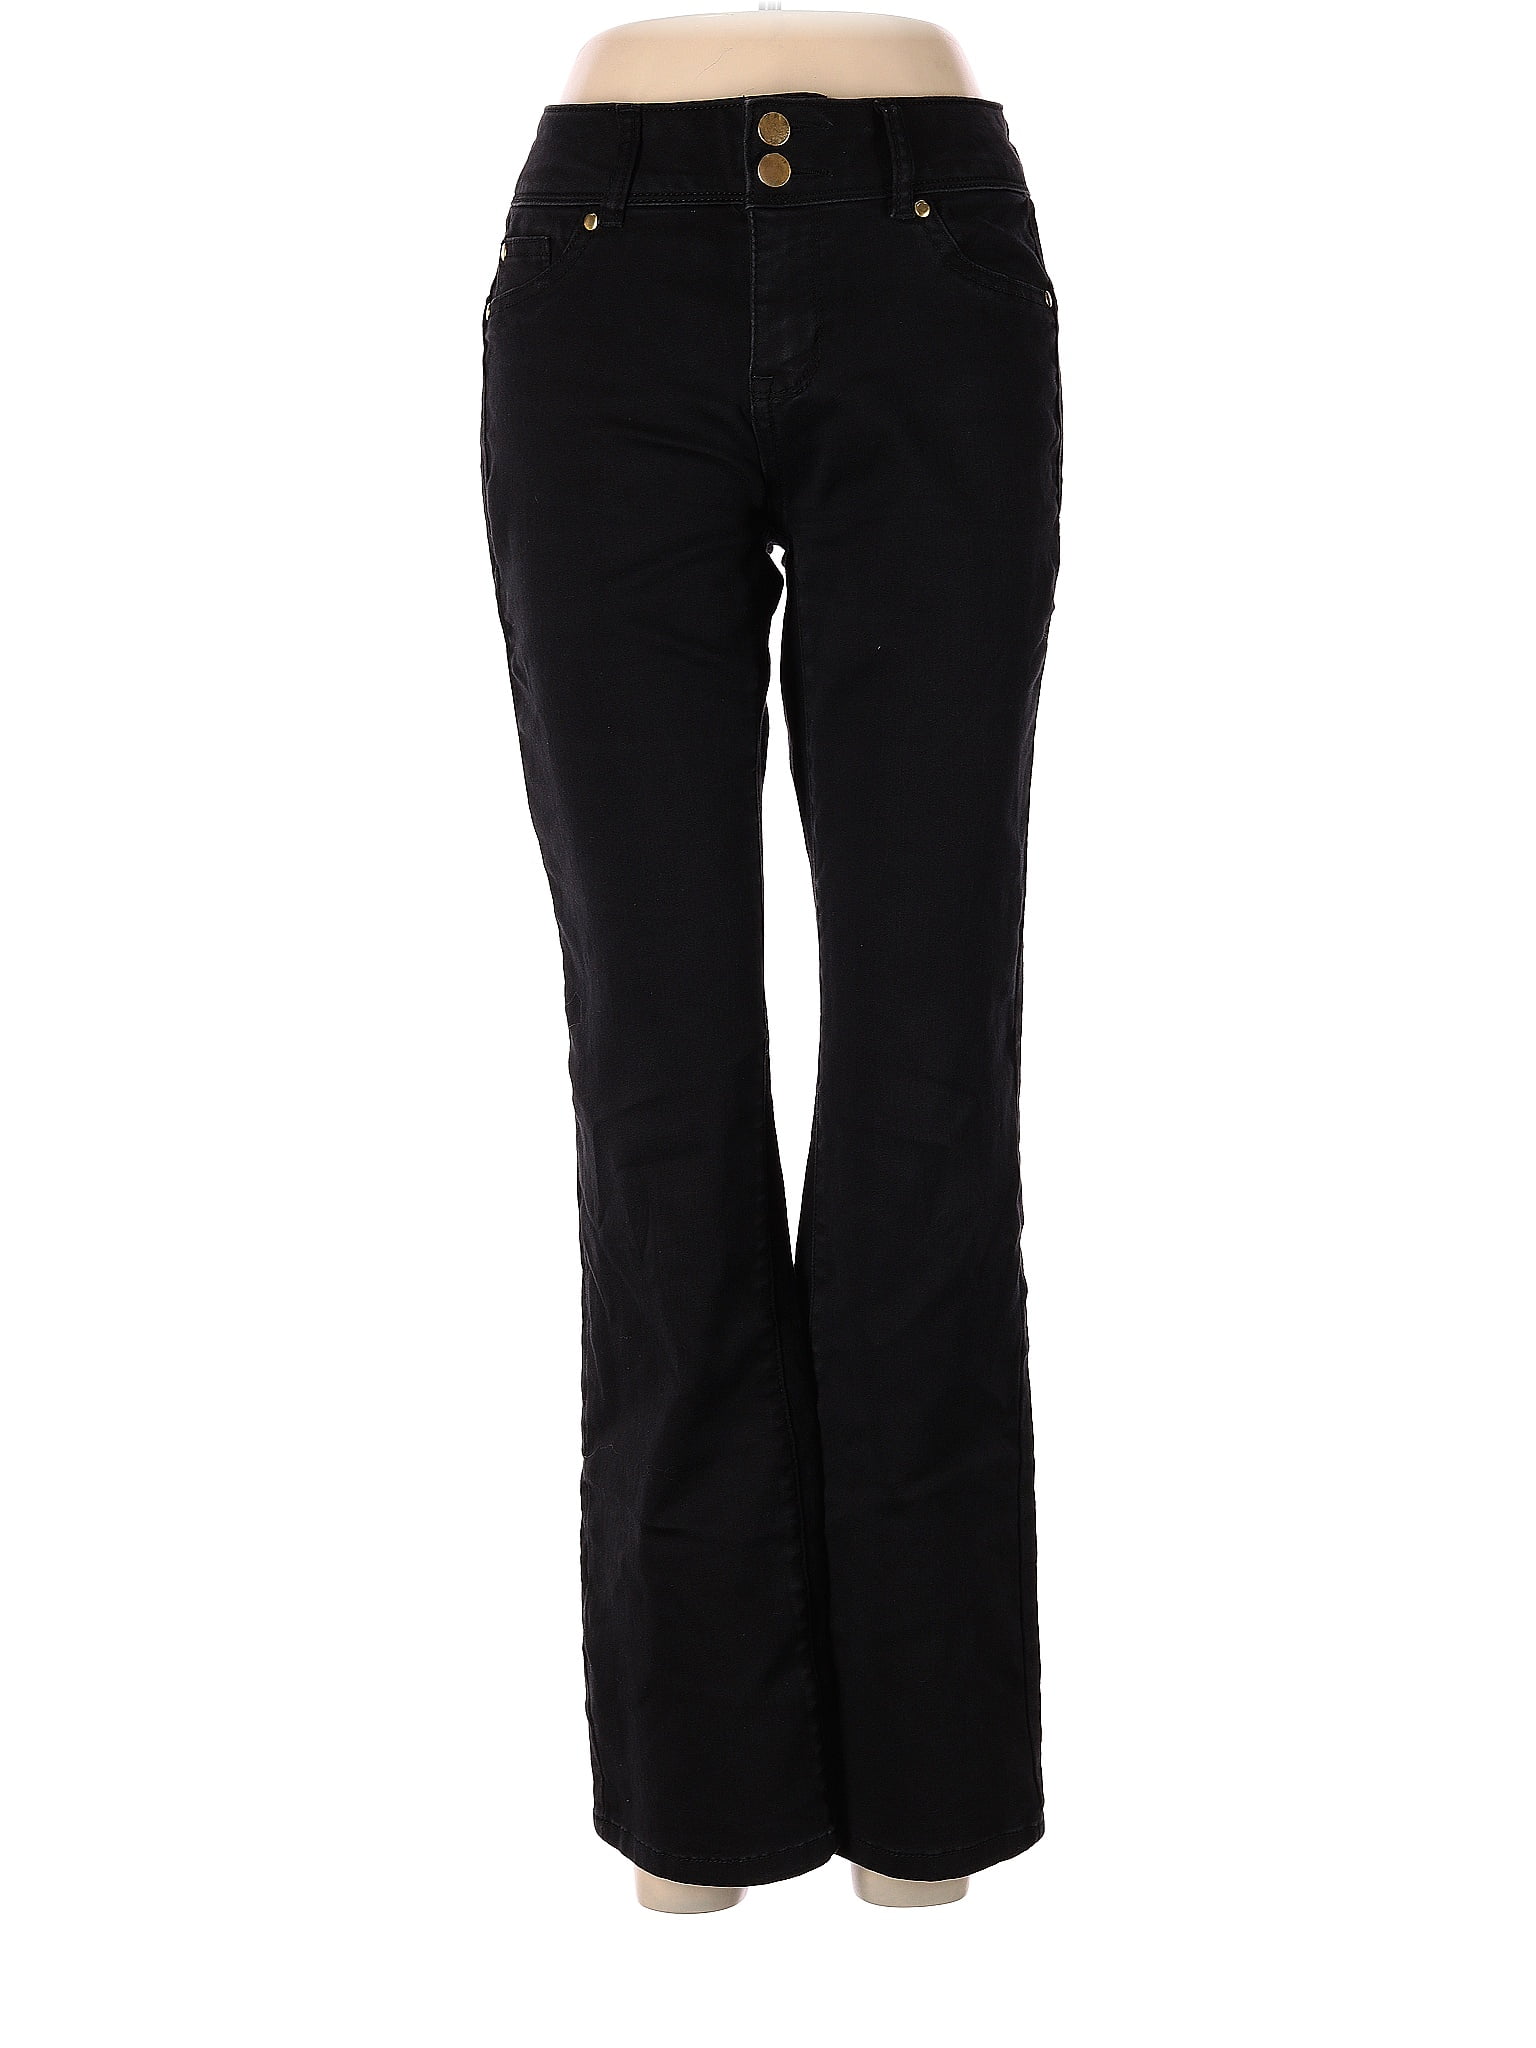 IMAN Solid Black Casual Pants Size 6 - 75% off | thredUP